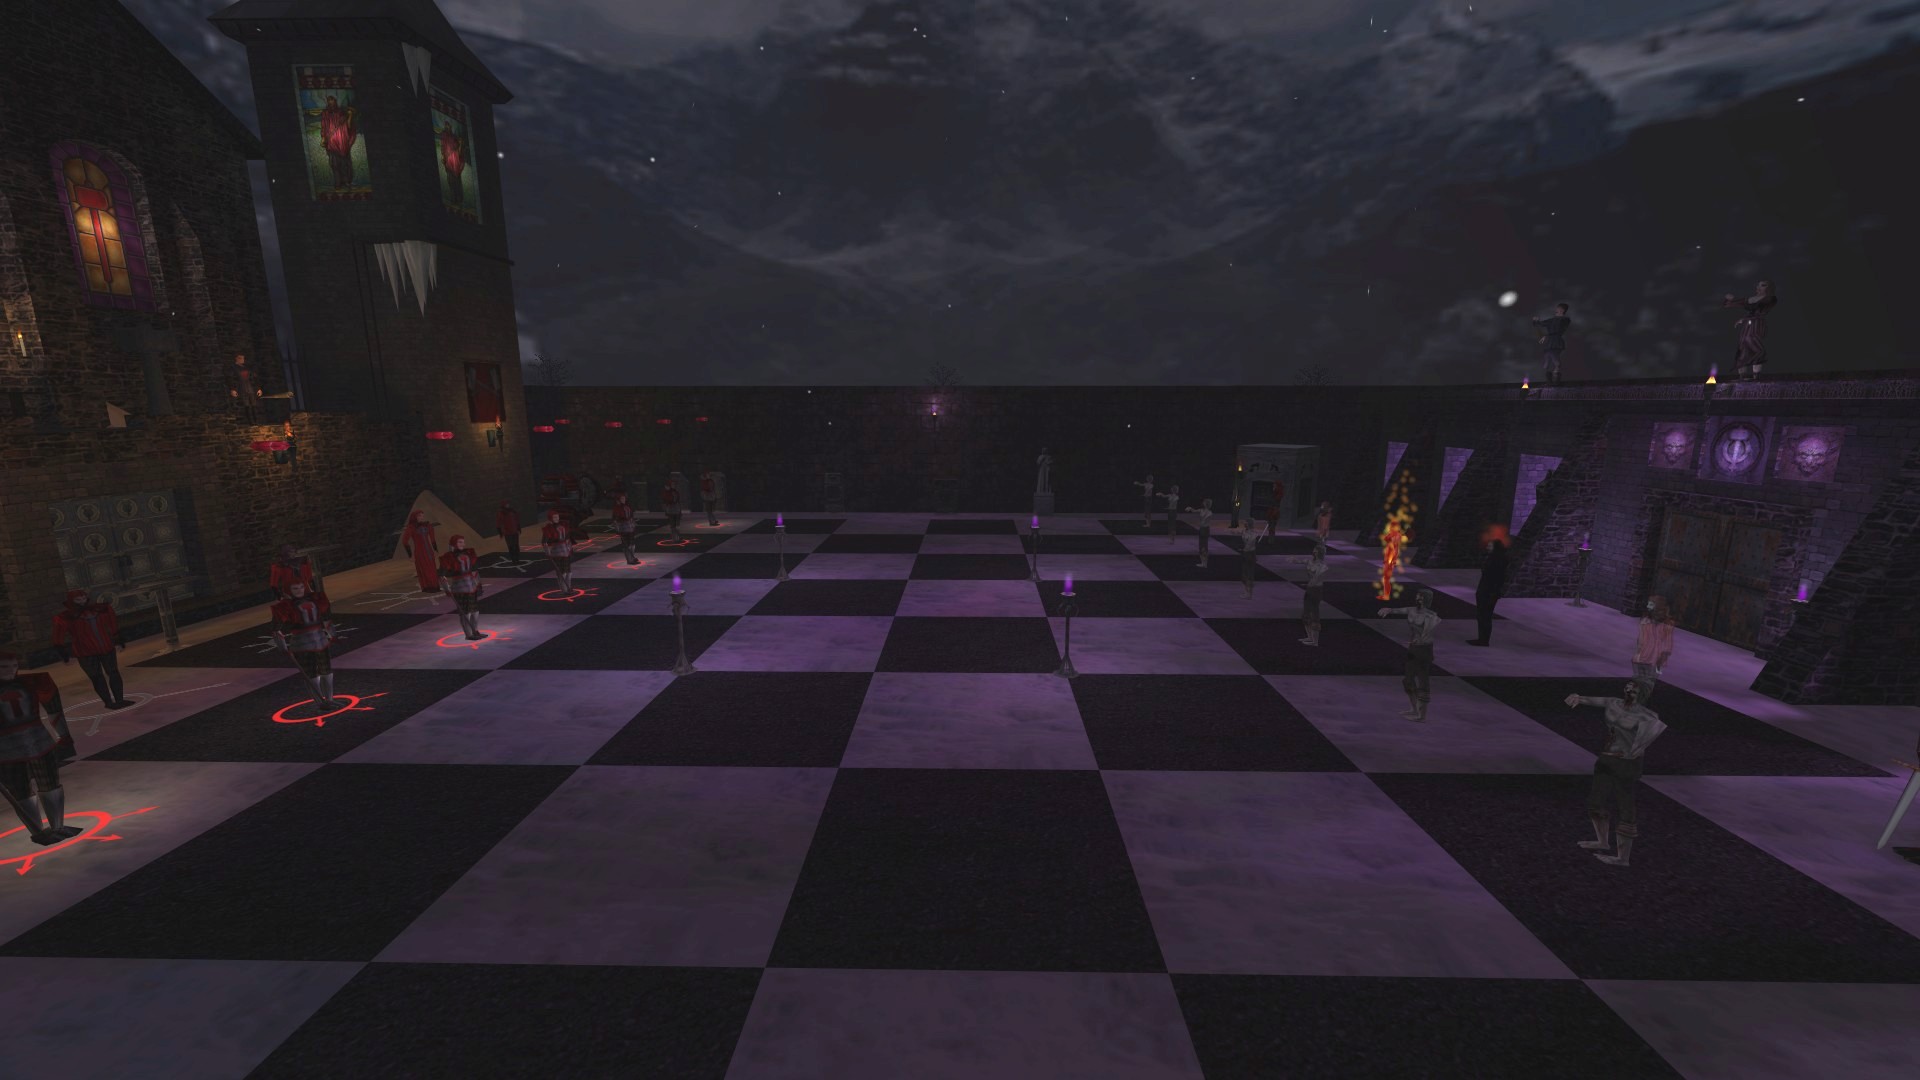 A Nice Game of Chess